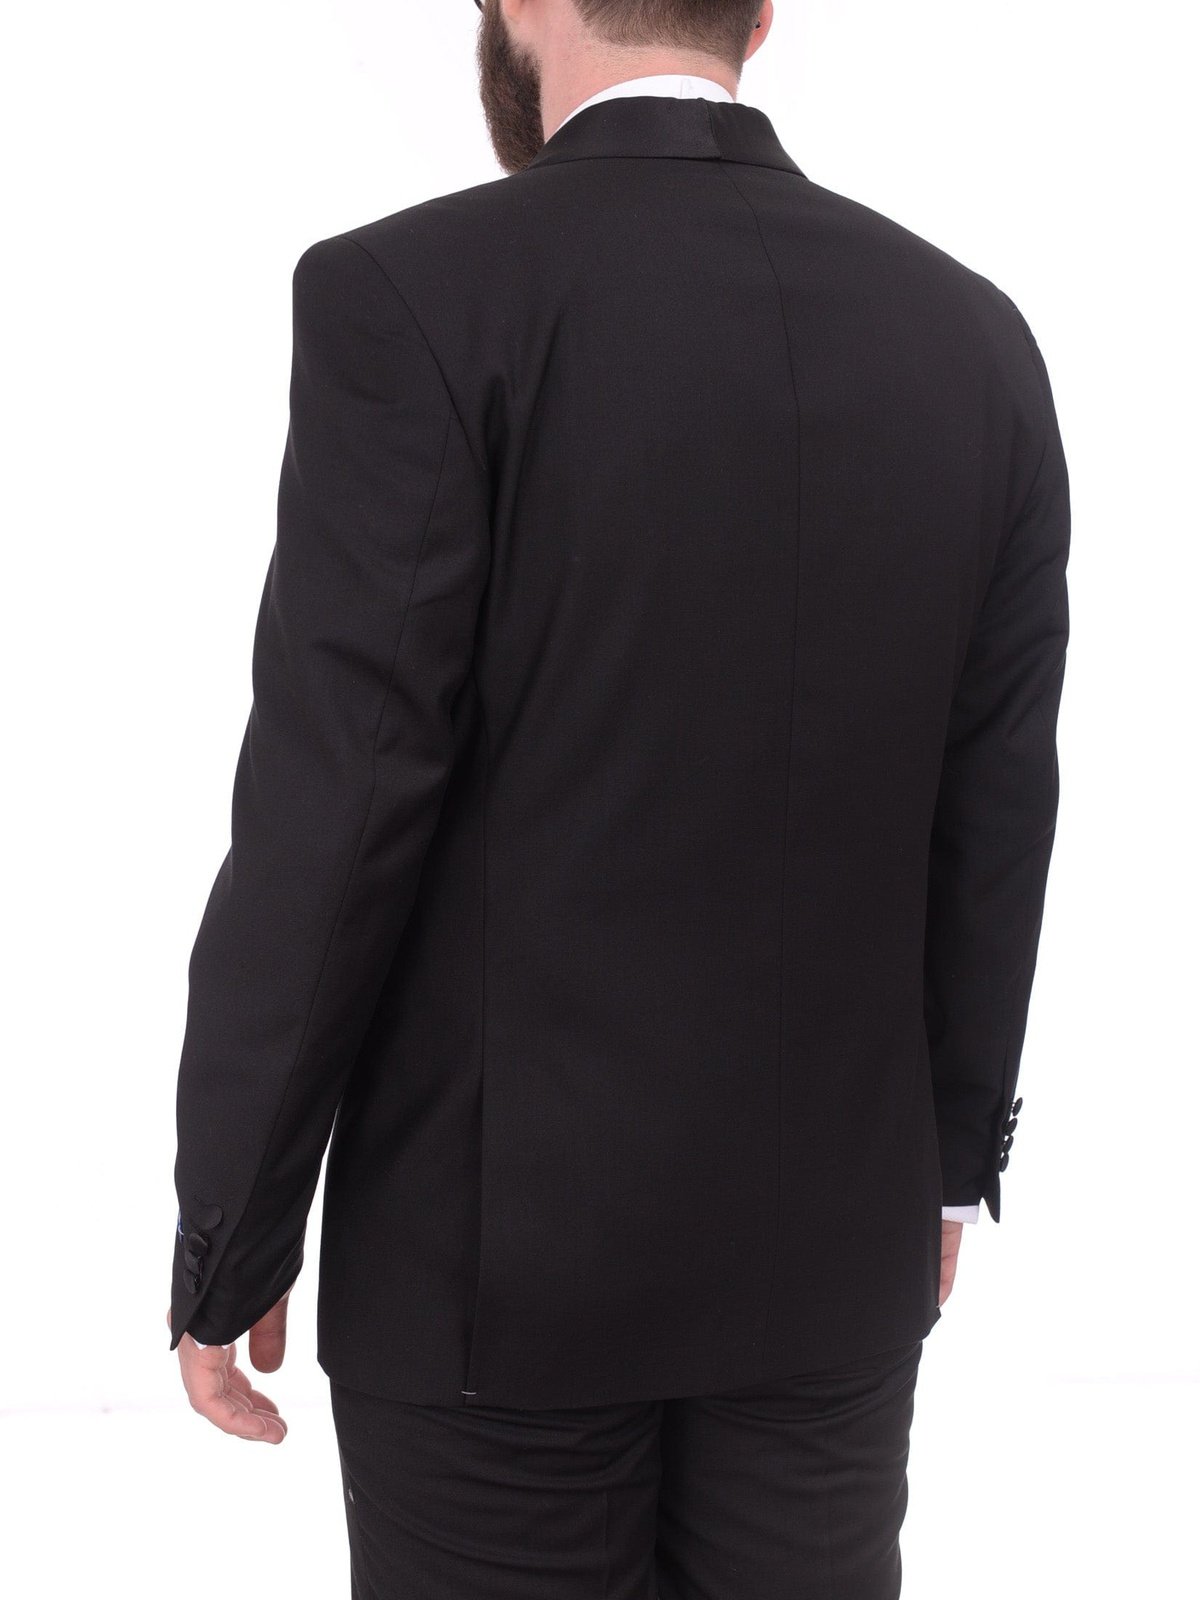 Gino Vitale TUXEDOS Gino Vitale Slim Fit Solid Black One Button Tuxedo Suit With Satin Shawl Lapels